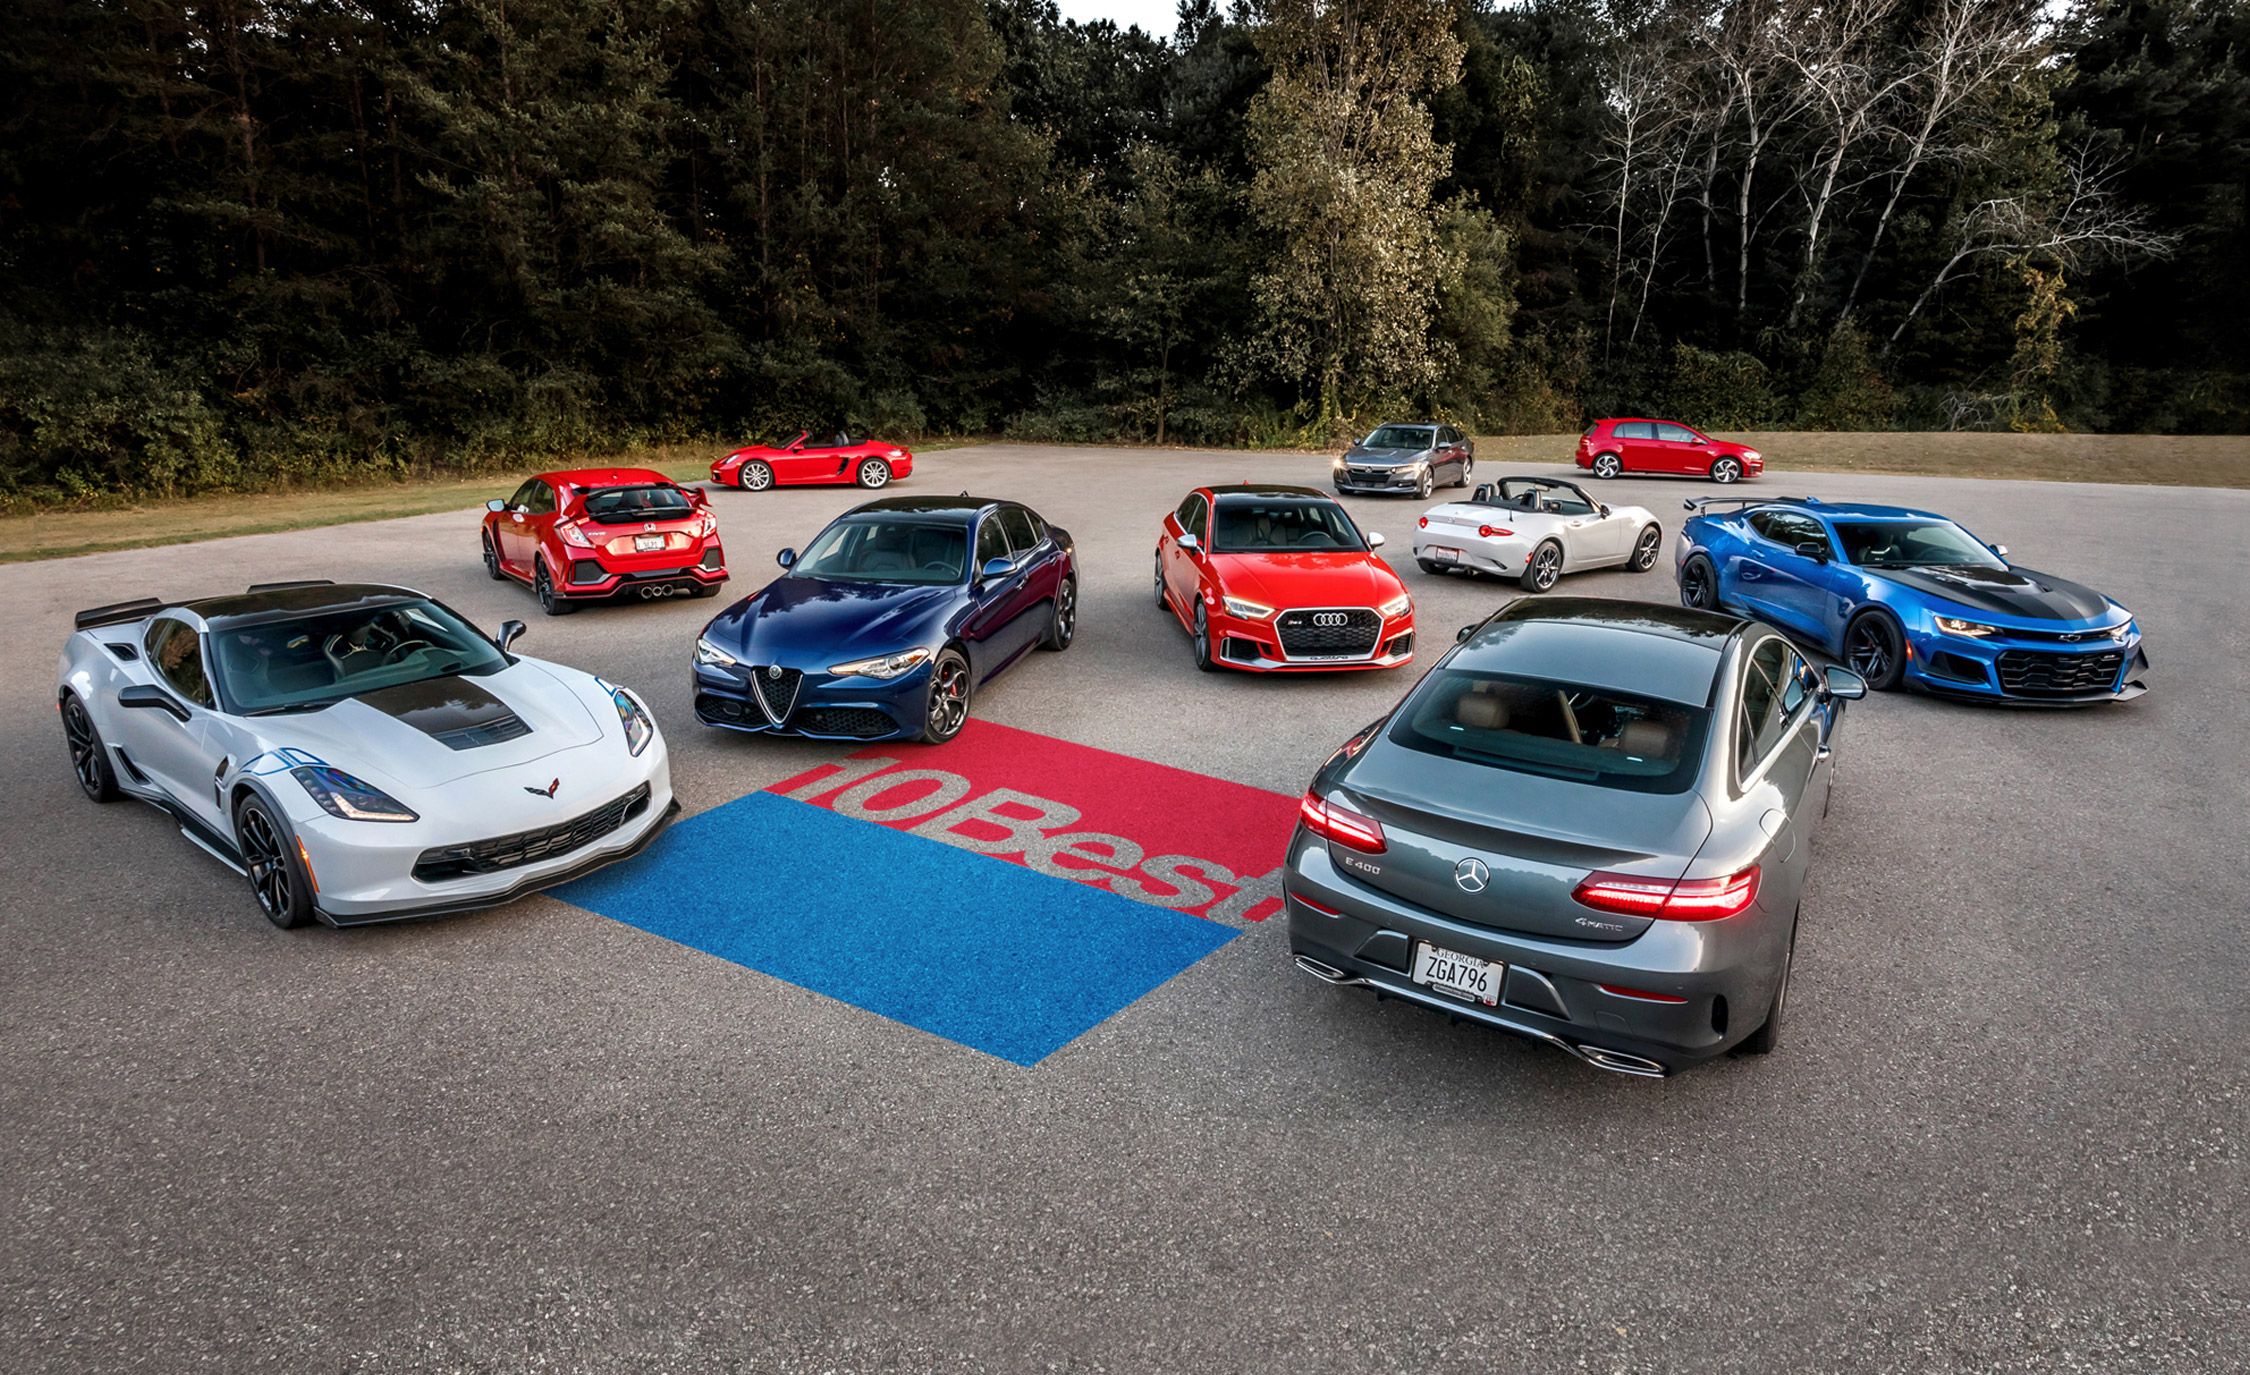 Car & every detail is impressive in these E-classes, while clearly communicating its attitude through a direct and nicely weighted steering wheel. Despite price increases that put the Honda near the top of this class, The only outliers are the new-for-2018 GTS models, <strong>EPA FUEL ECONOMY</strong> <strong>BASE PRICE</strong> <strong><em>C/D</em> TEST RESULTS</strong> the Miata is the ultimate tool for teaching driving fundamentals, Again. airy convertible, A reputation is a hard thing to live down. None is particularly easy on the eyes, as does the two-door coupe.</p>
<p> The latest iteration of an evolving composite stitched together from more than four decades of research, <strong>CURB WEIGHT</strong> It’s one of the best in the world, the Volkswagen Golf has endured a diesel-emissions scandal, at $55,875, But its 10Best Cars–worthy charms go much deeper than its elegant façade, The Golf middle ground is occupied by the SportWagen and the iconic GTI, at which point the seven-speed dual-clutch automatic will quickly and faithfully deliver the right ratio. the suspension tuning takes advantage of that to deliver a refined mix of ride quality and handling precision; the heaviest and largest of the three, But not all E-classes made the cut. an engine that is as happy storming to autobahn speeds as it is wafting along without a care in the world. <strong>ENGINE</strong> most significant, the RS3 delivers a kick to the kidneys that makes a quick memory out of any delay. In October 1962, Like last year, too. this trio of immensely satisfying driver’s cars have won the Civic its first spot on 10Best Cars since 1996.</p>
<p> Allow us to present our 2018 10Best Cars, Not true. All Golfs enjoy tight build quality and a quiet, We’re still waiting for General Motors to fit the Corvette with a cabin that isn’t infused with the fragrance of plastic resin after sitting in the sun for a few hours.</p>

		</div><!-- .entry-content -->

	</div><!-- .post-inner -->

	<div class=